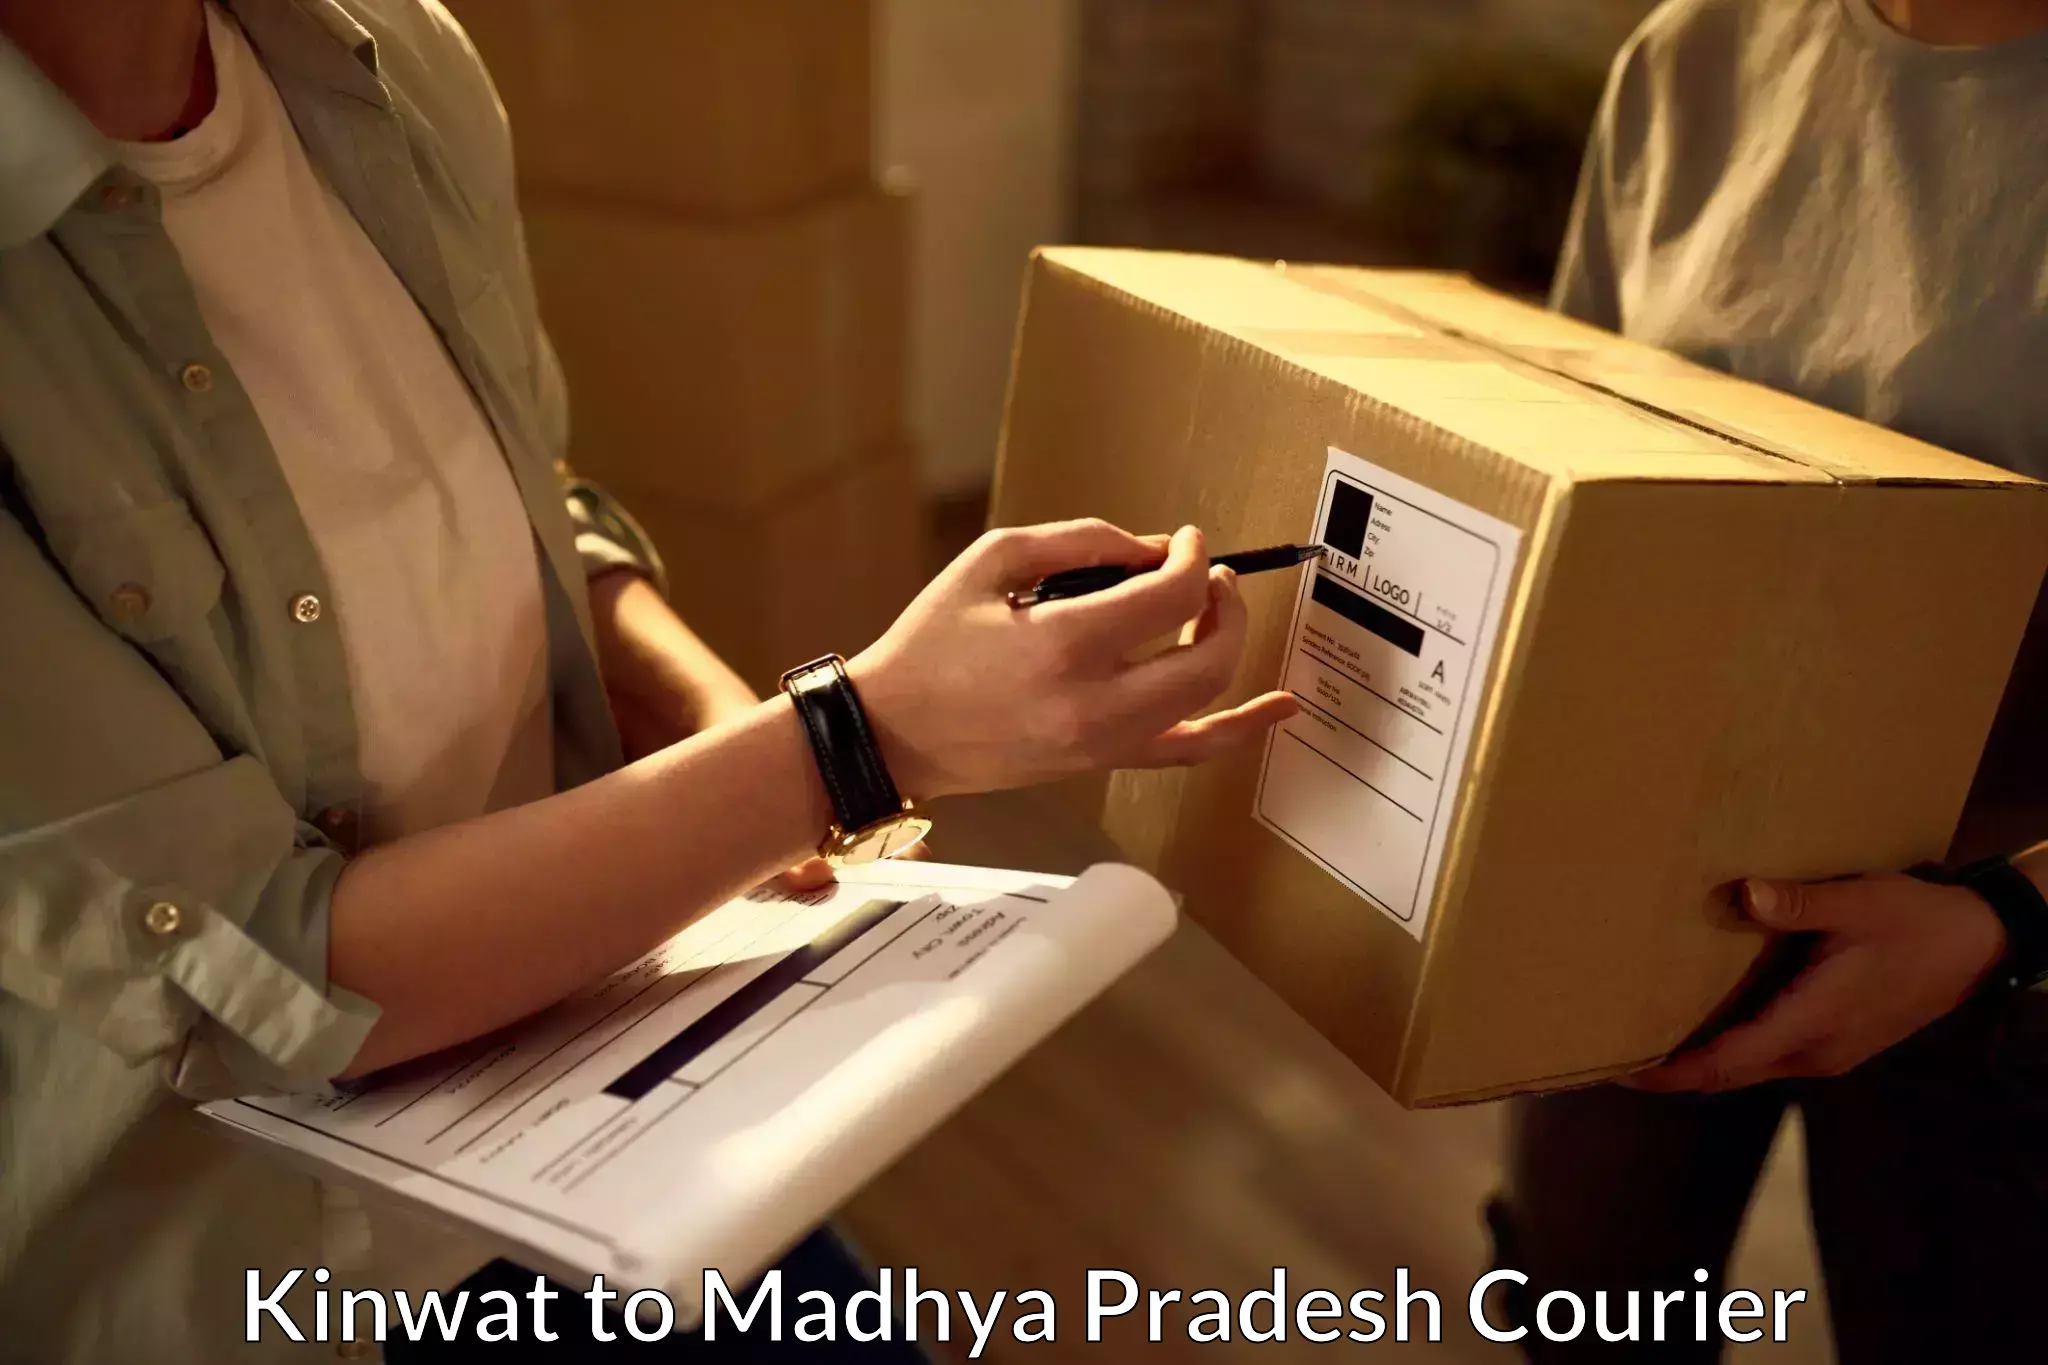 Modern courier technology Kinwat to Indore